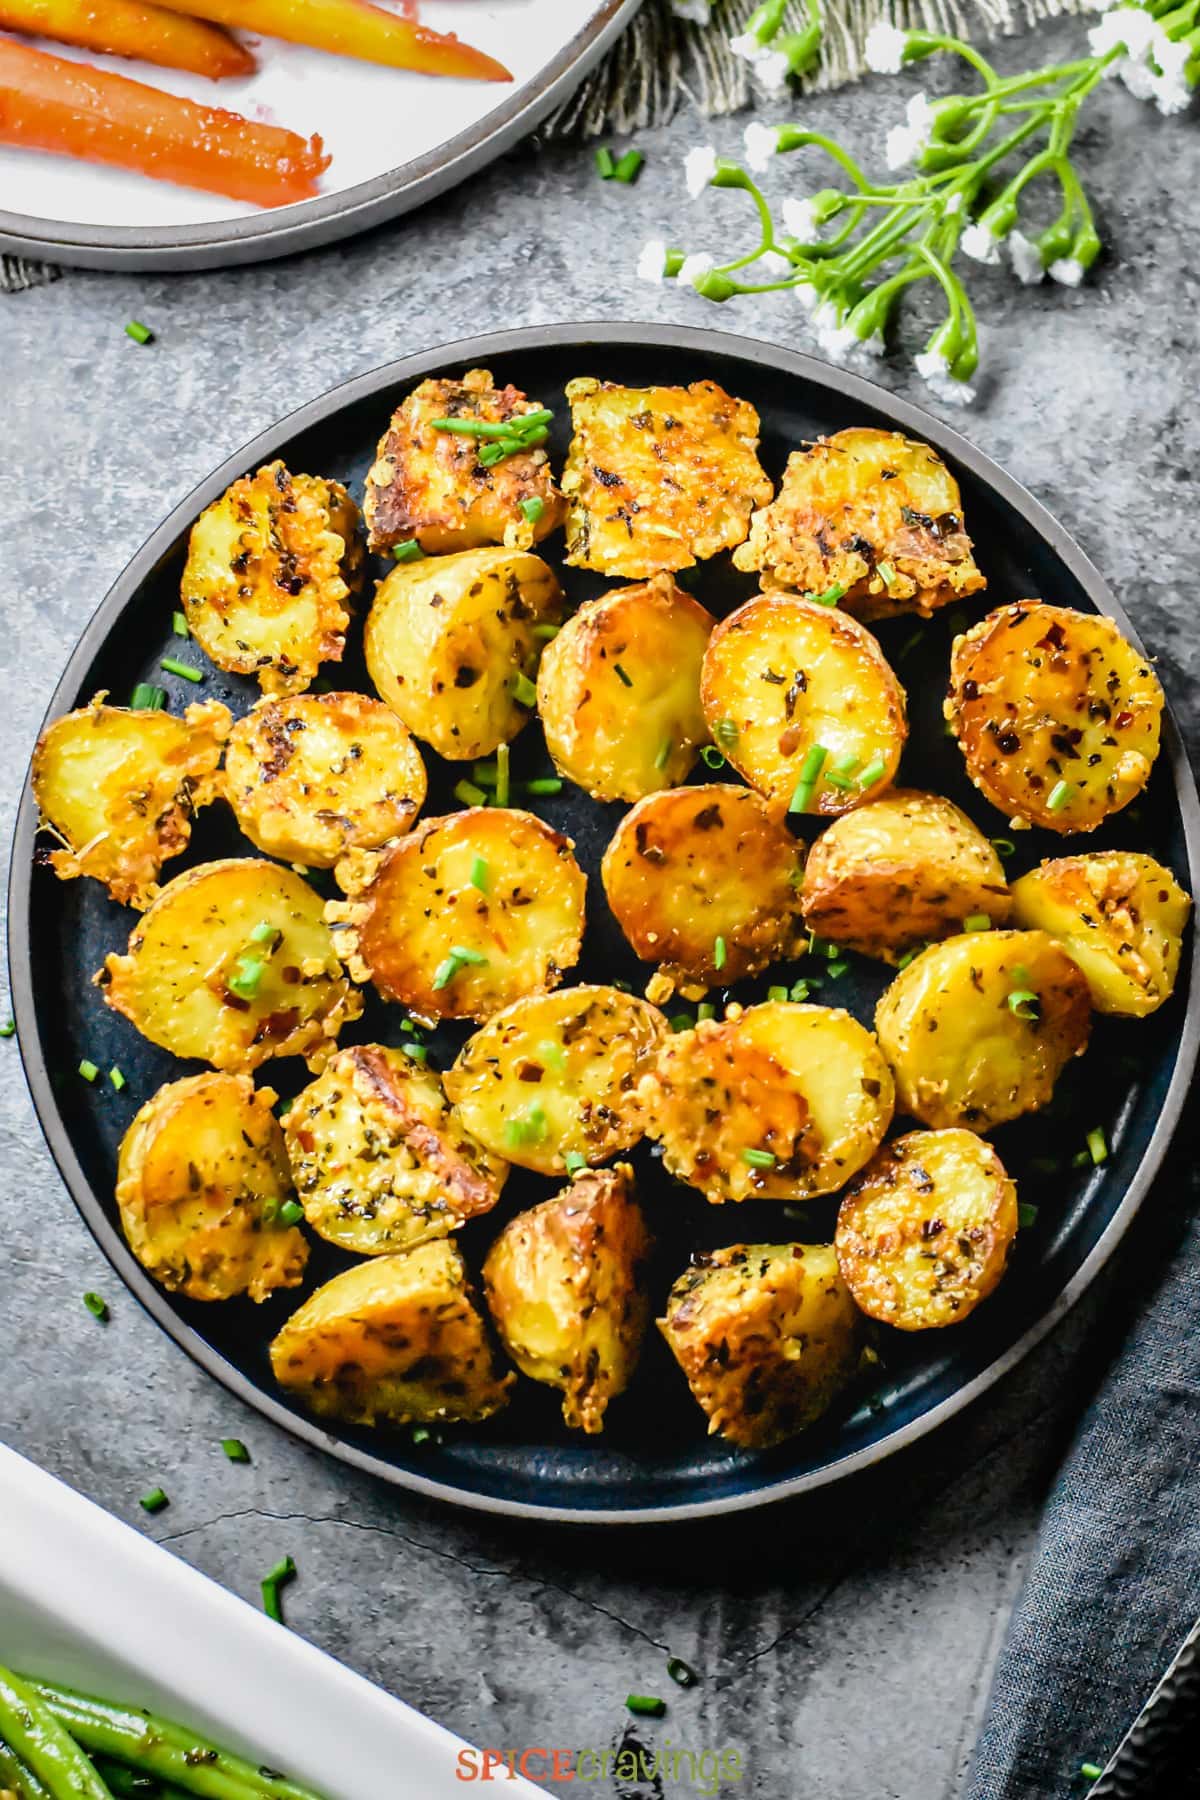 Crisp baby potatoes crusted with herbs and cheese